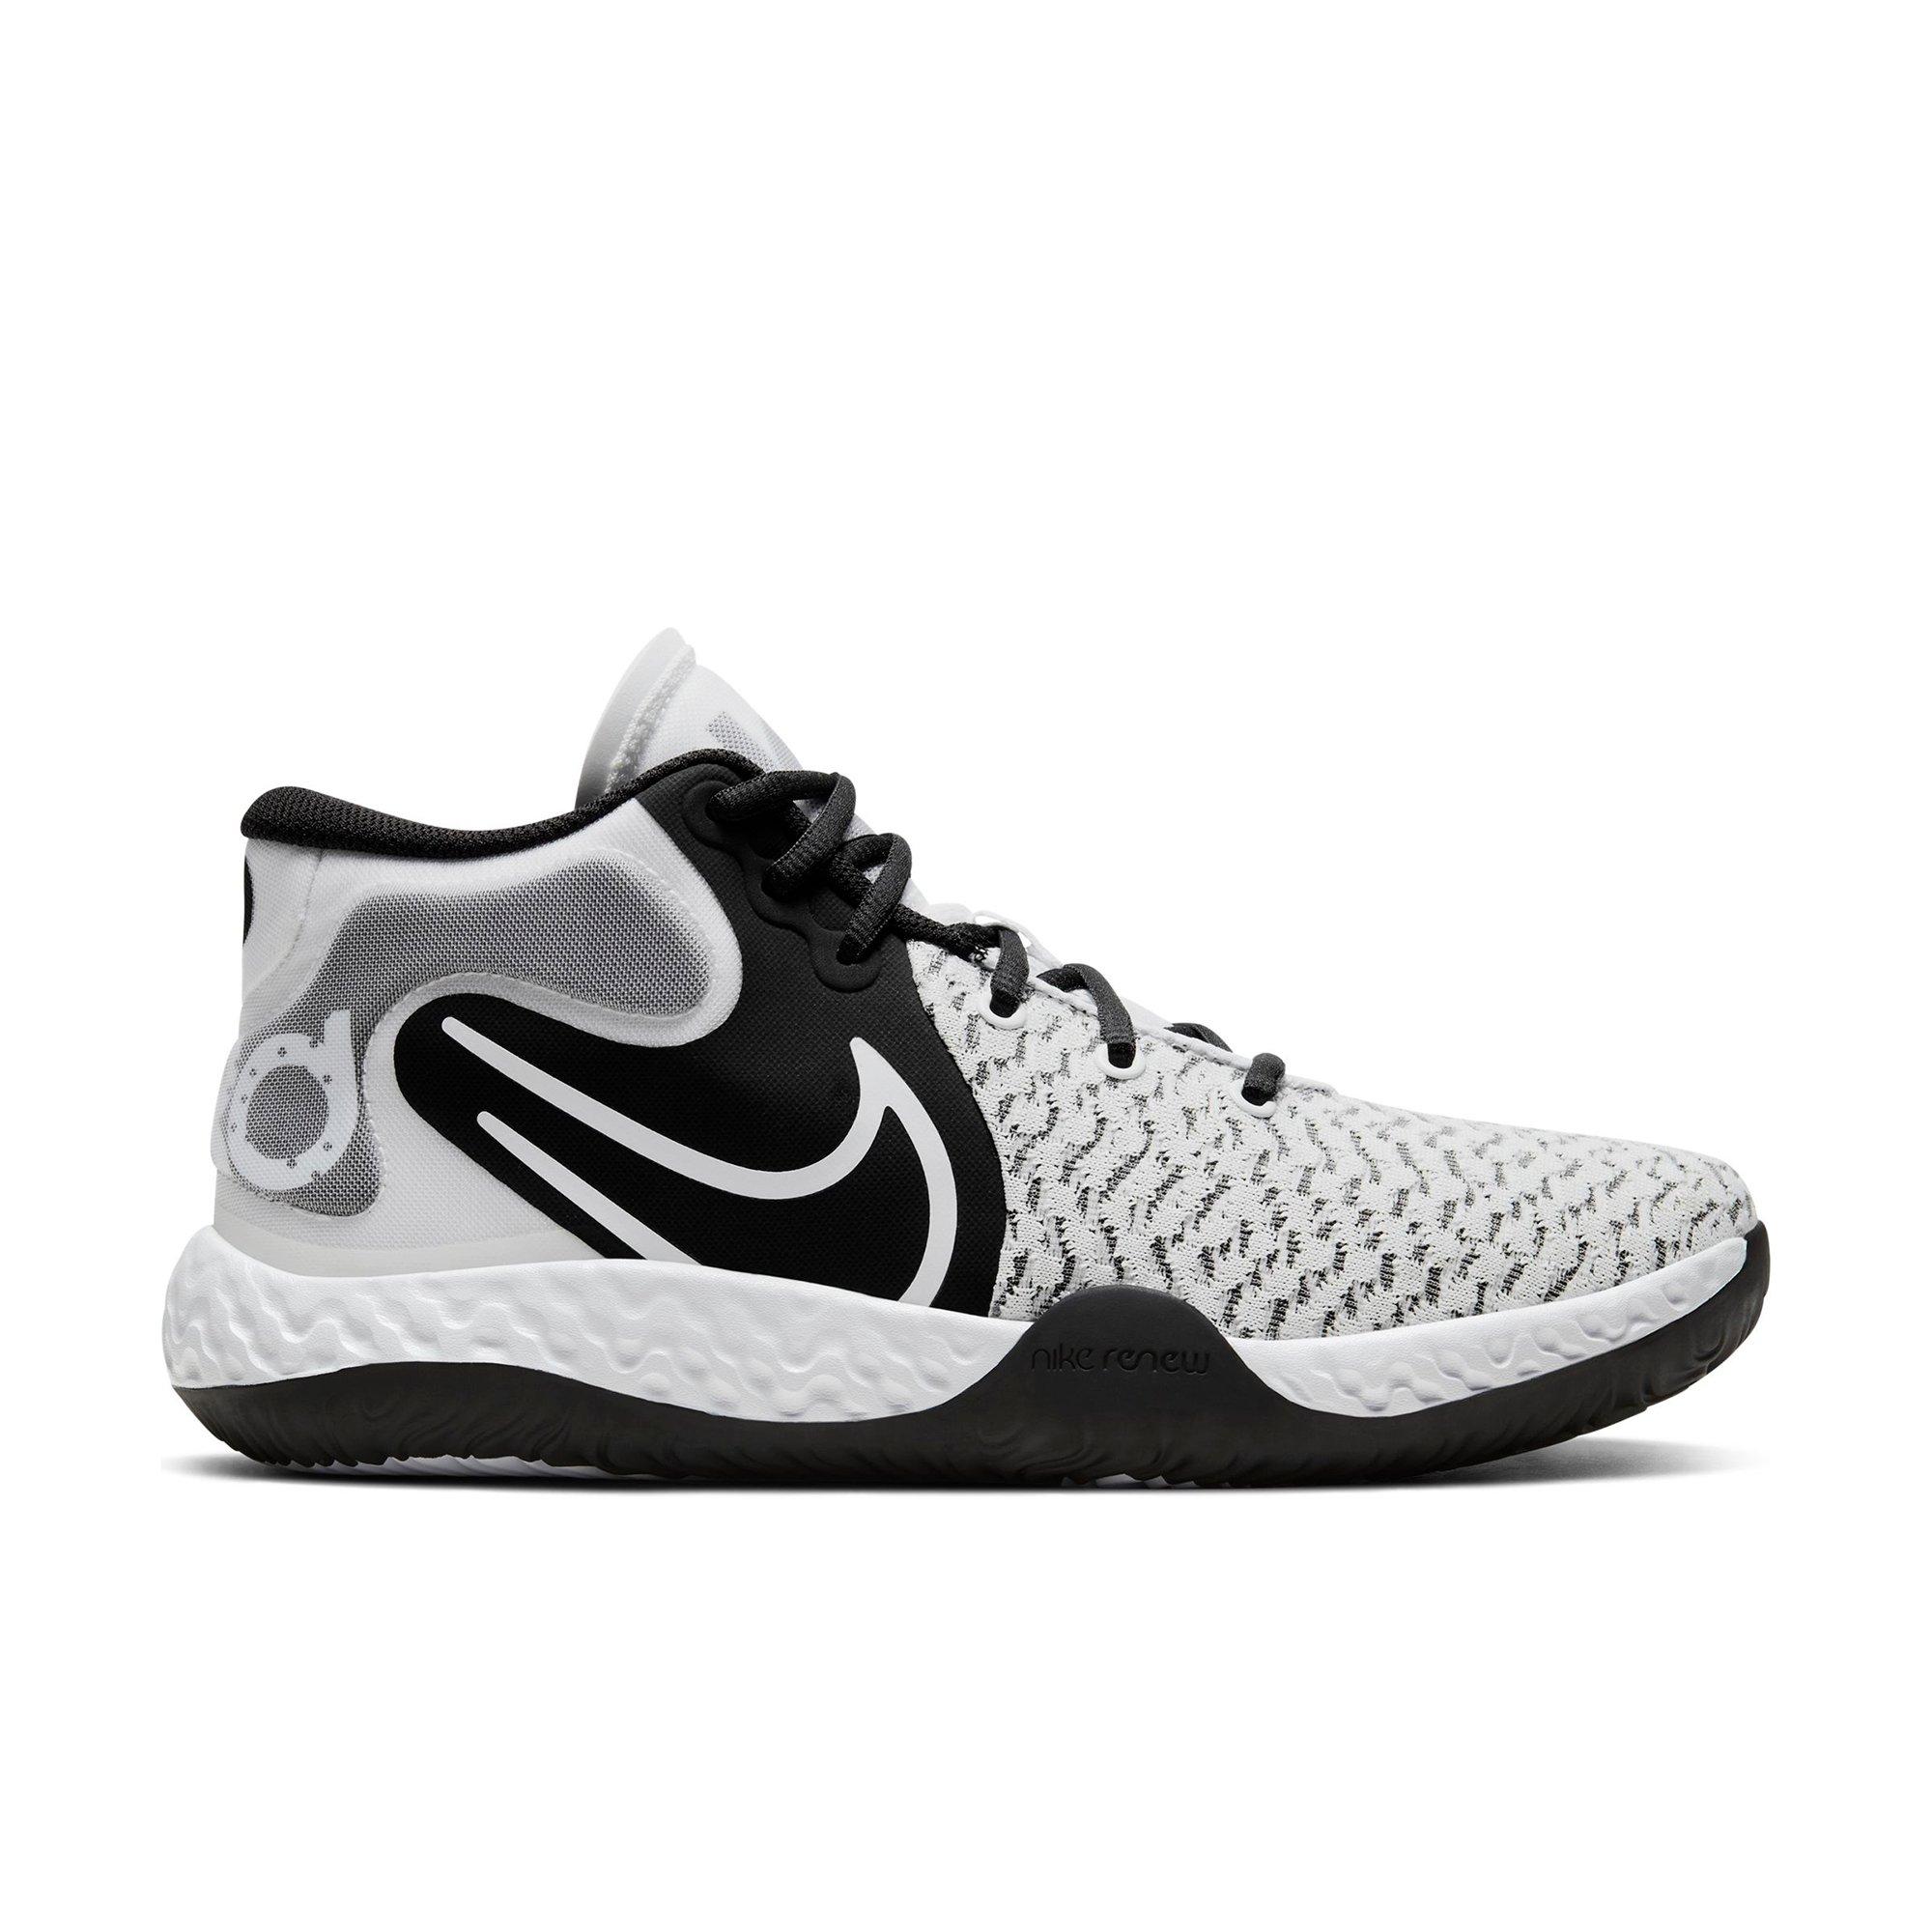 kd 5 black and white